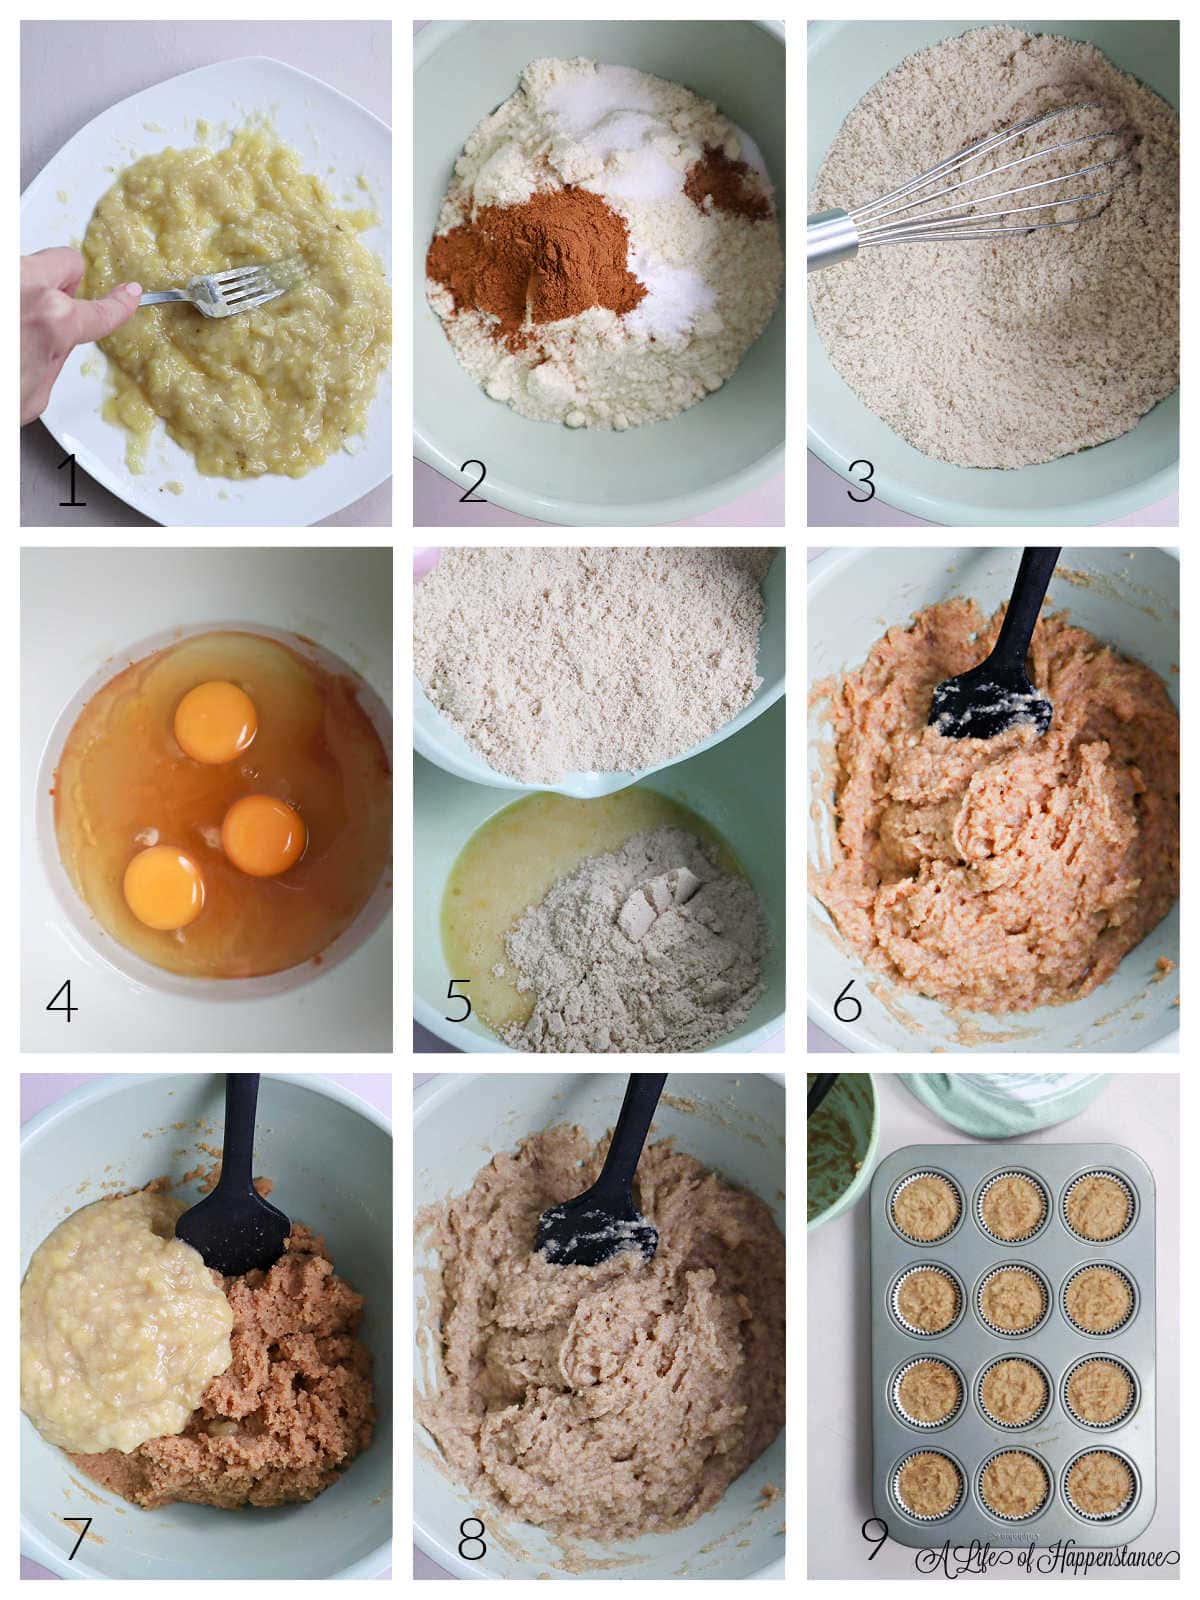 A collage showing how to make the muffin batter.